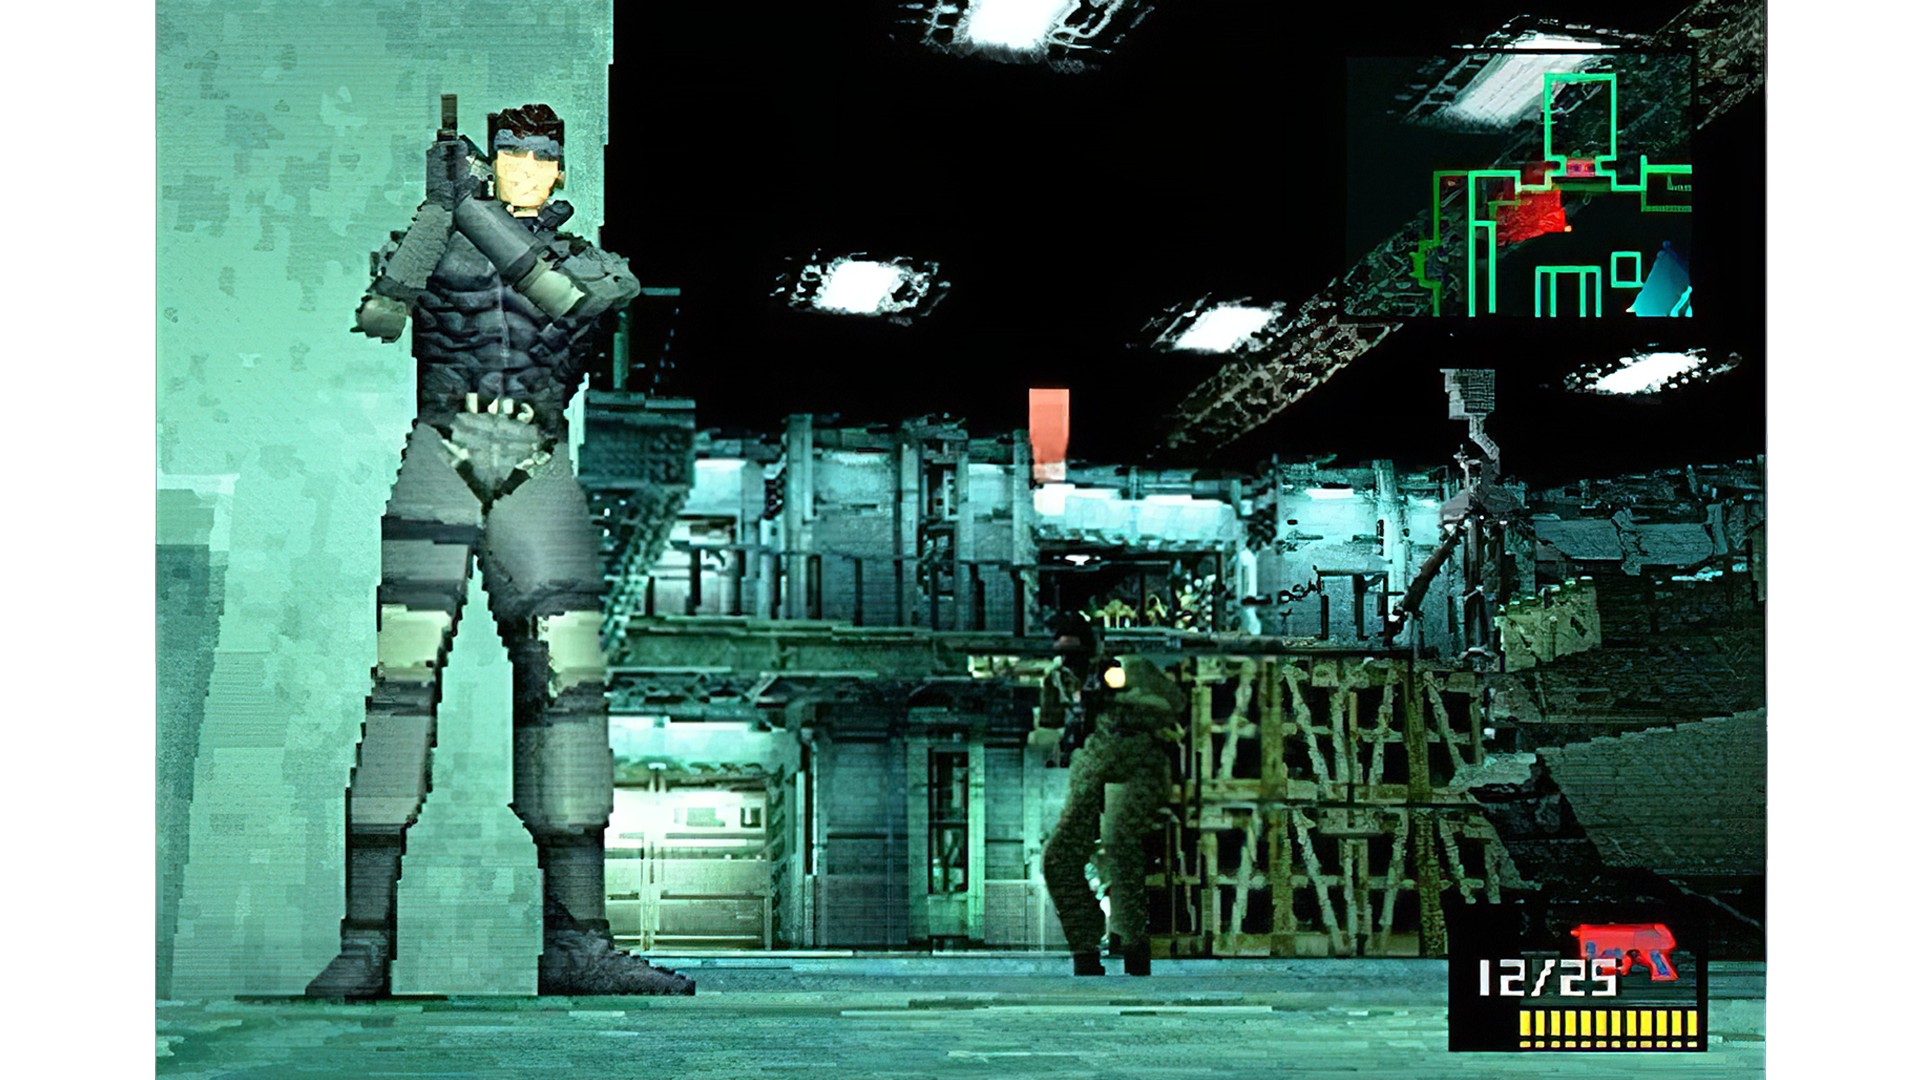 Metal Gear Solid offers a glimpse into what will soon be possible from a video game